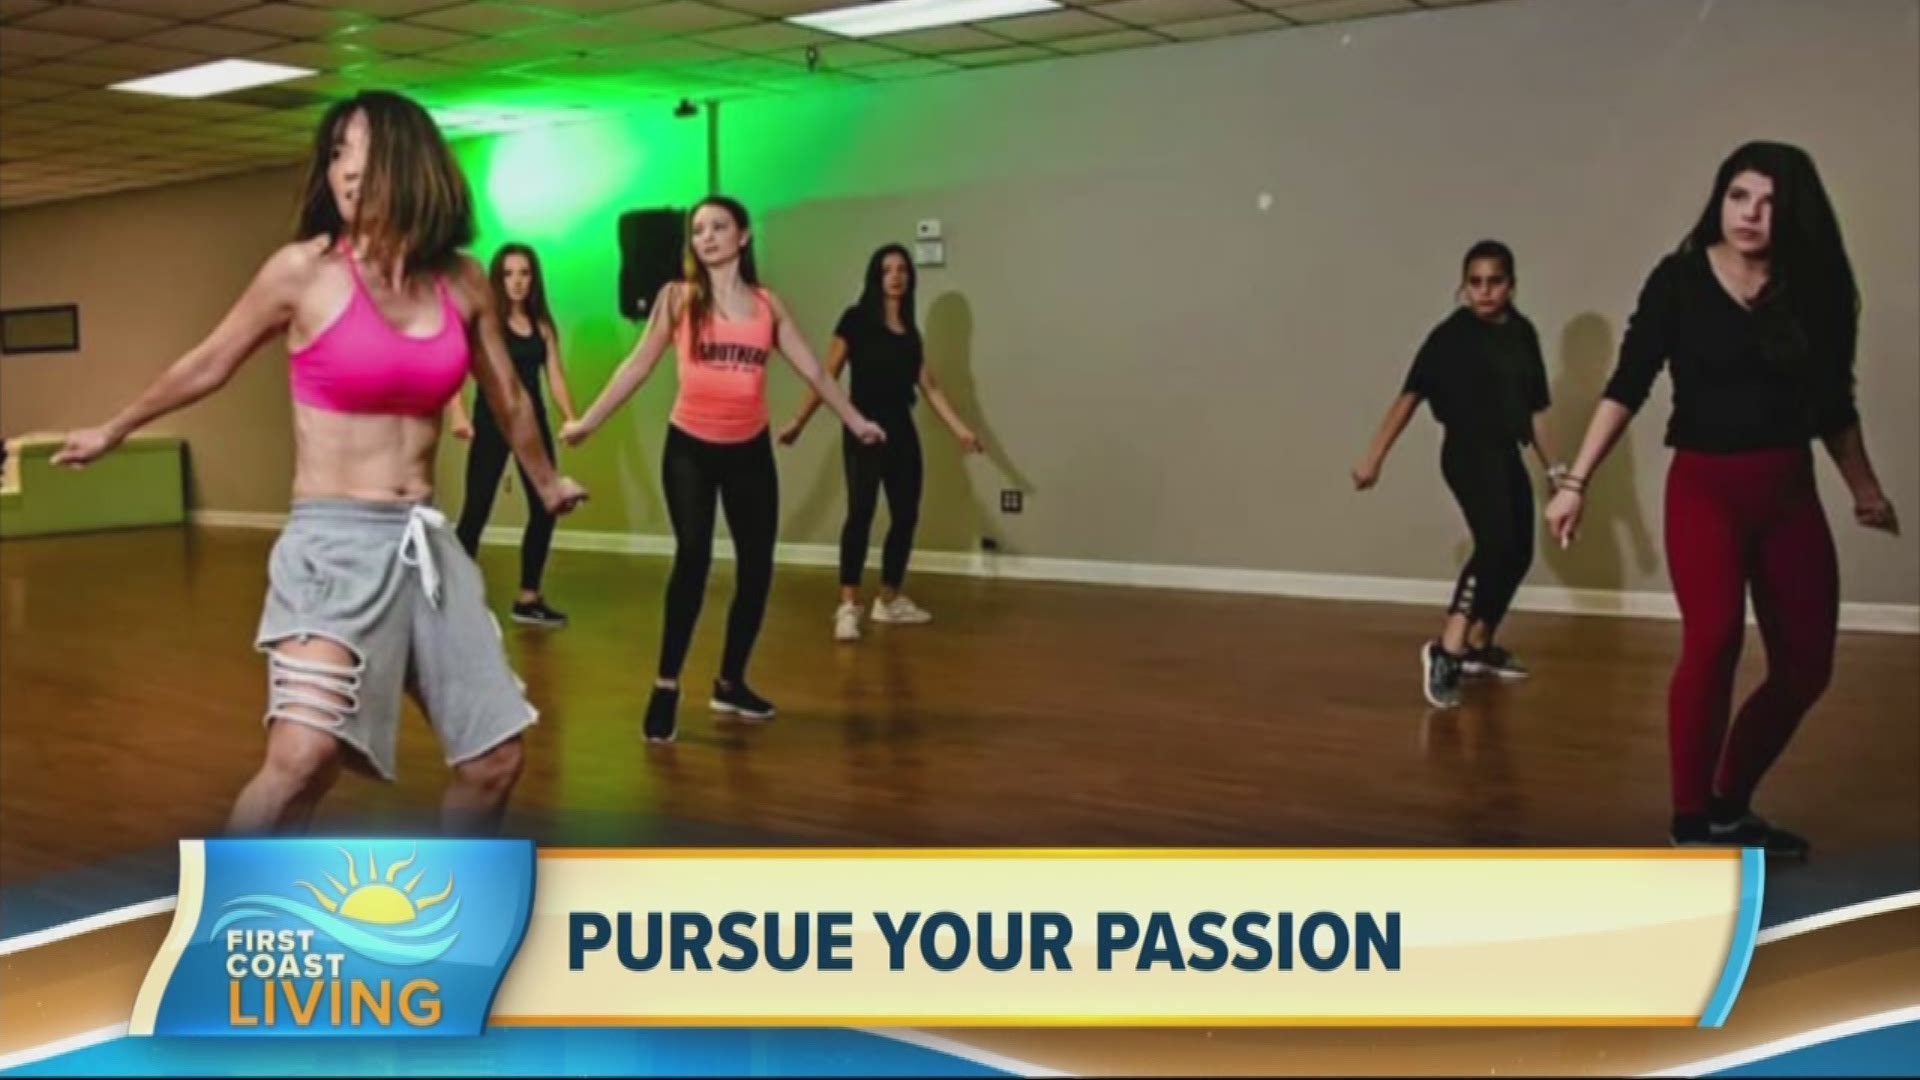 It's never too late to pursue your passion, that's especially true for Missy Cole the owner of Ready, Set, Pro! She helps women of all ages prep to become professional sports dancers!